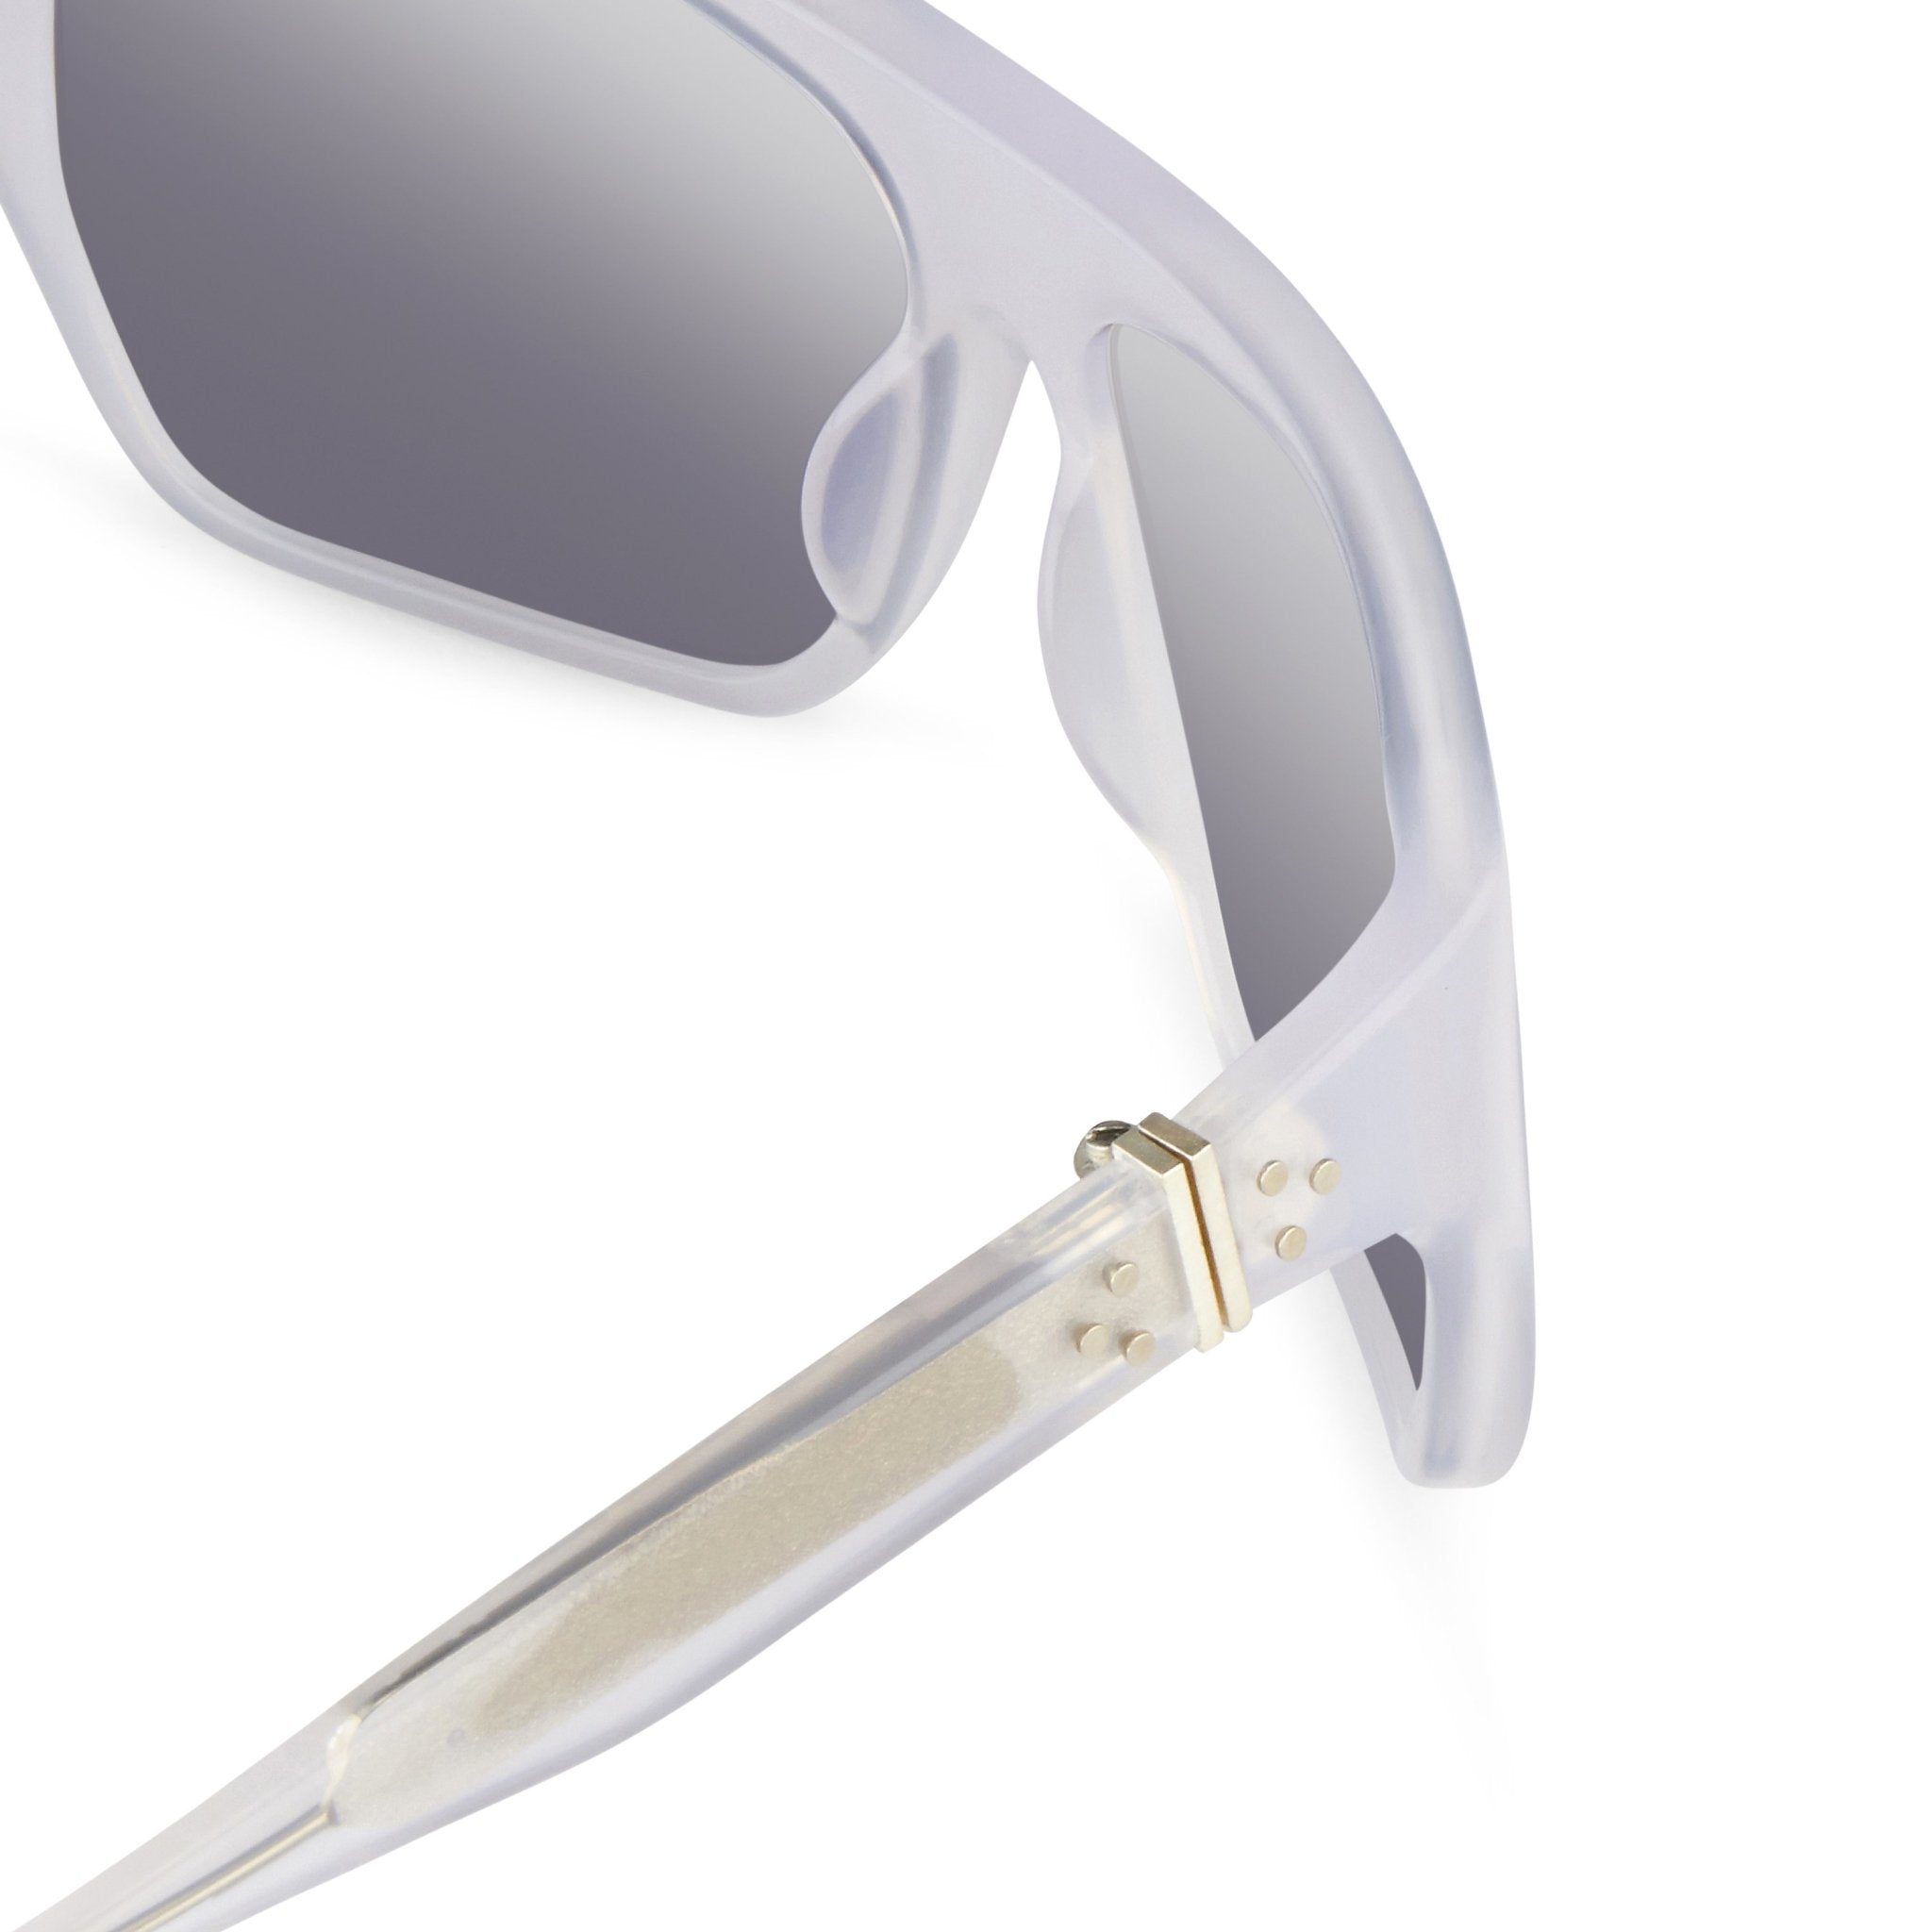 Ann Demeulemeester Sunglasses Oversized White 925 Silver with Grey Lenses AD31C4SUN - Watches & Crystals